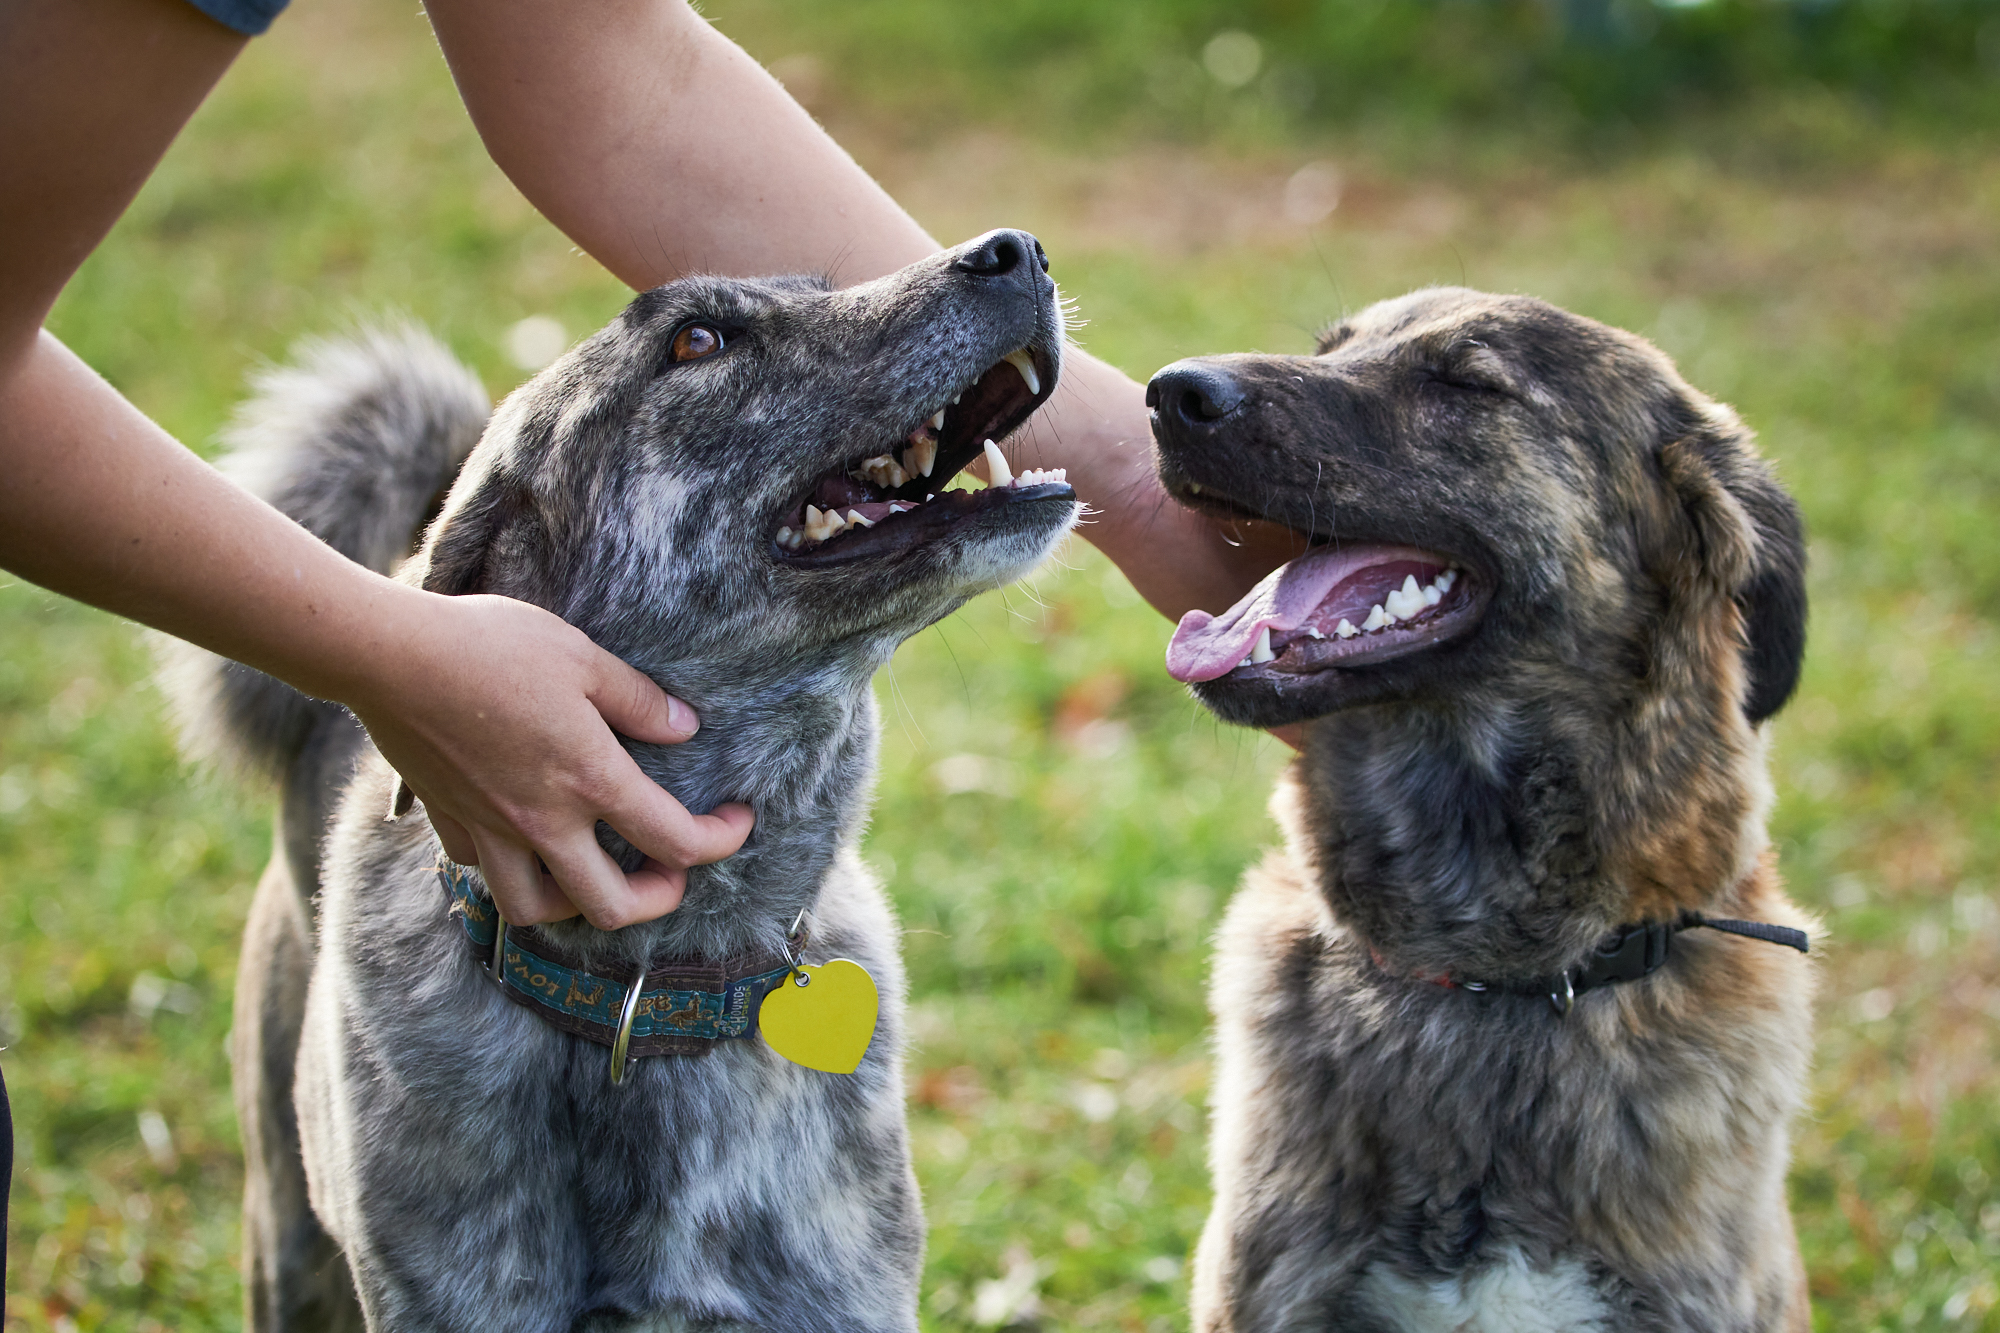 Above: Ollie and Roxanne, two of the dogs who survived cruelty before their rescue